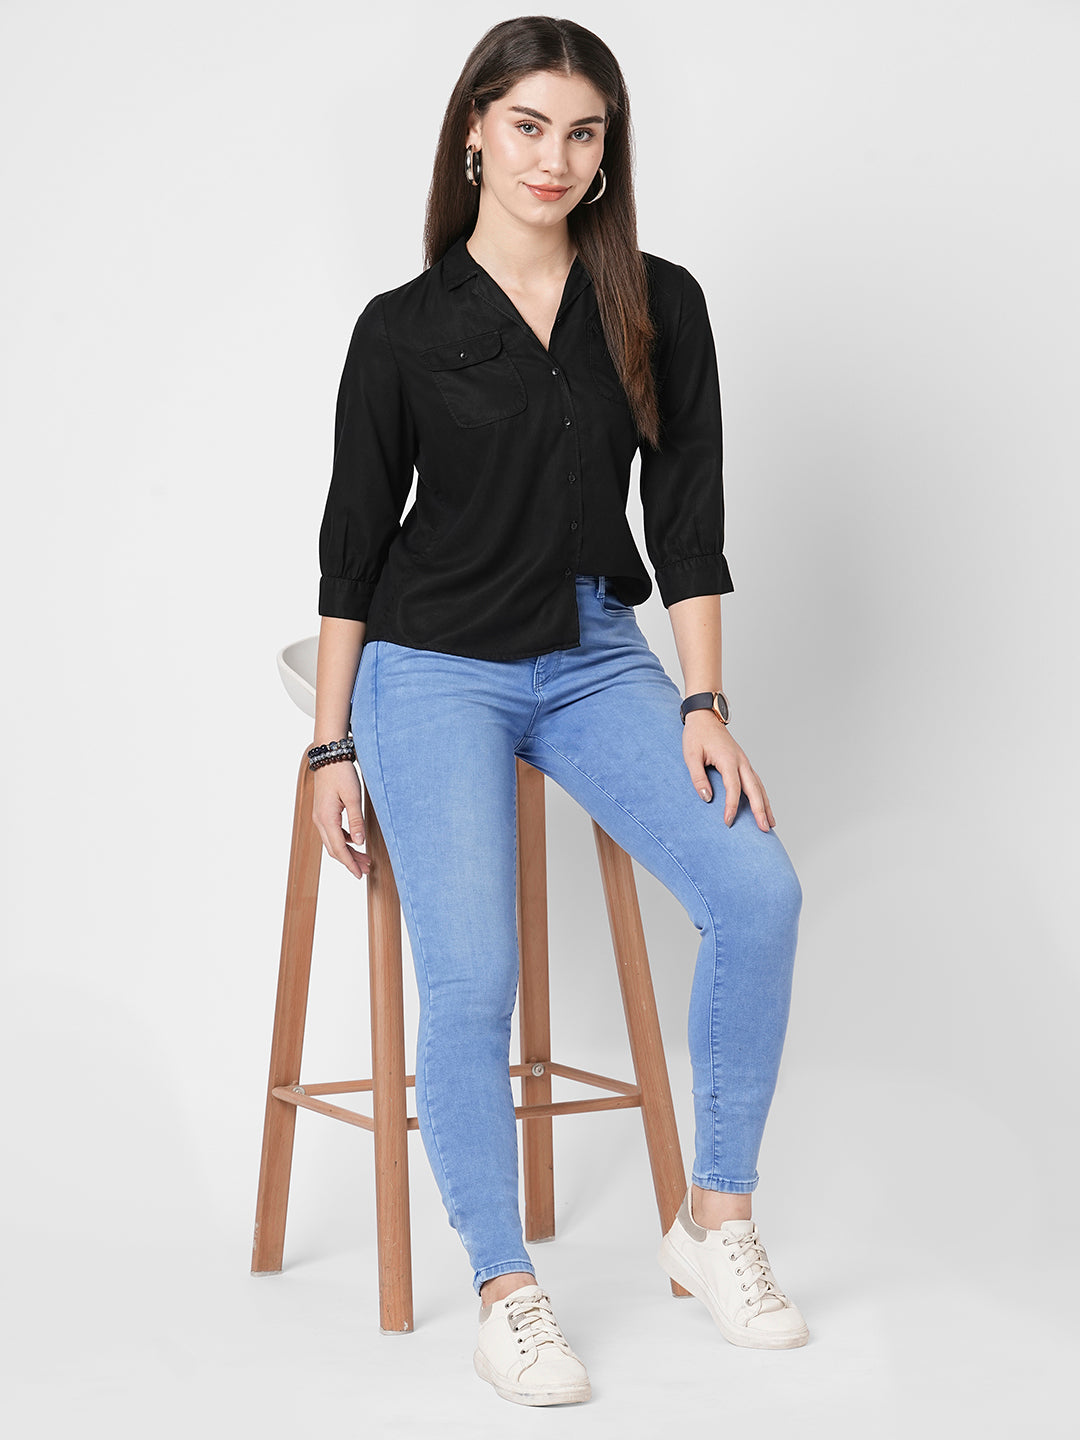 Women Solid Slim Fit Casual Shirt